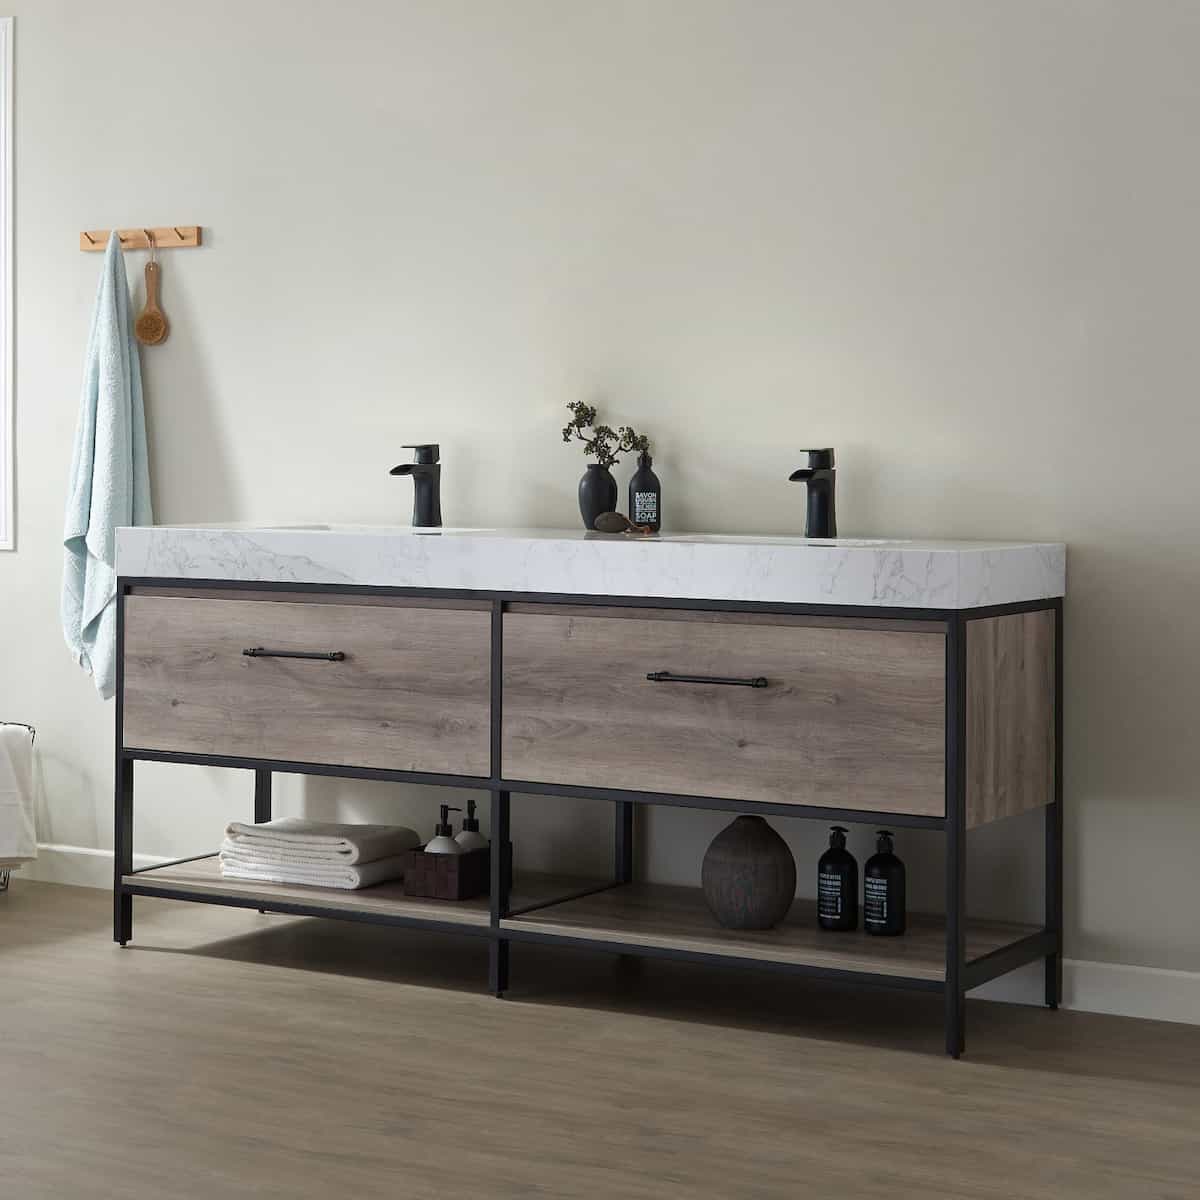 Vinnova Palma 72 Inch Freestanding Double Vanity in Mexican Oak with White Composite Grain Stone Countertop Without Mirrors Side 701272-MXO-GW-NM